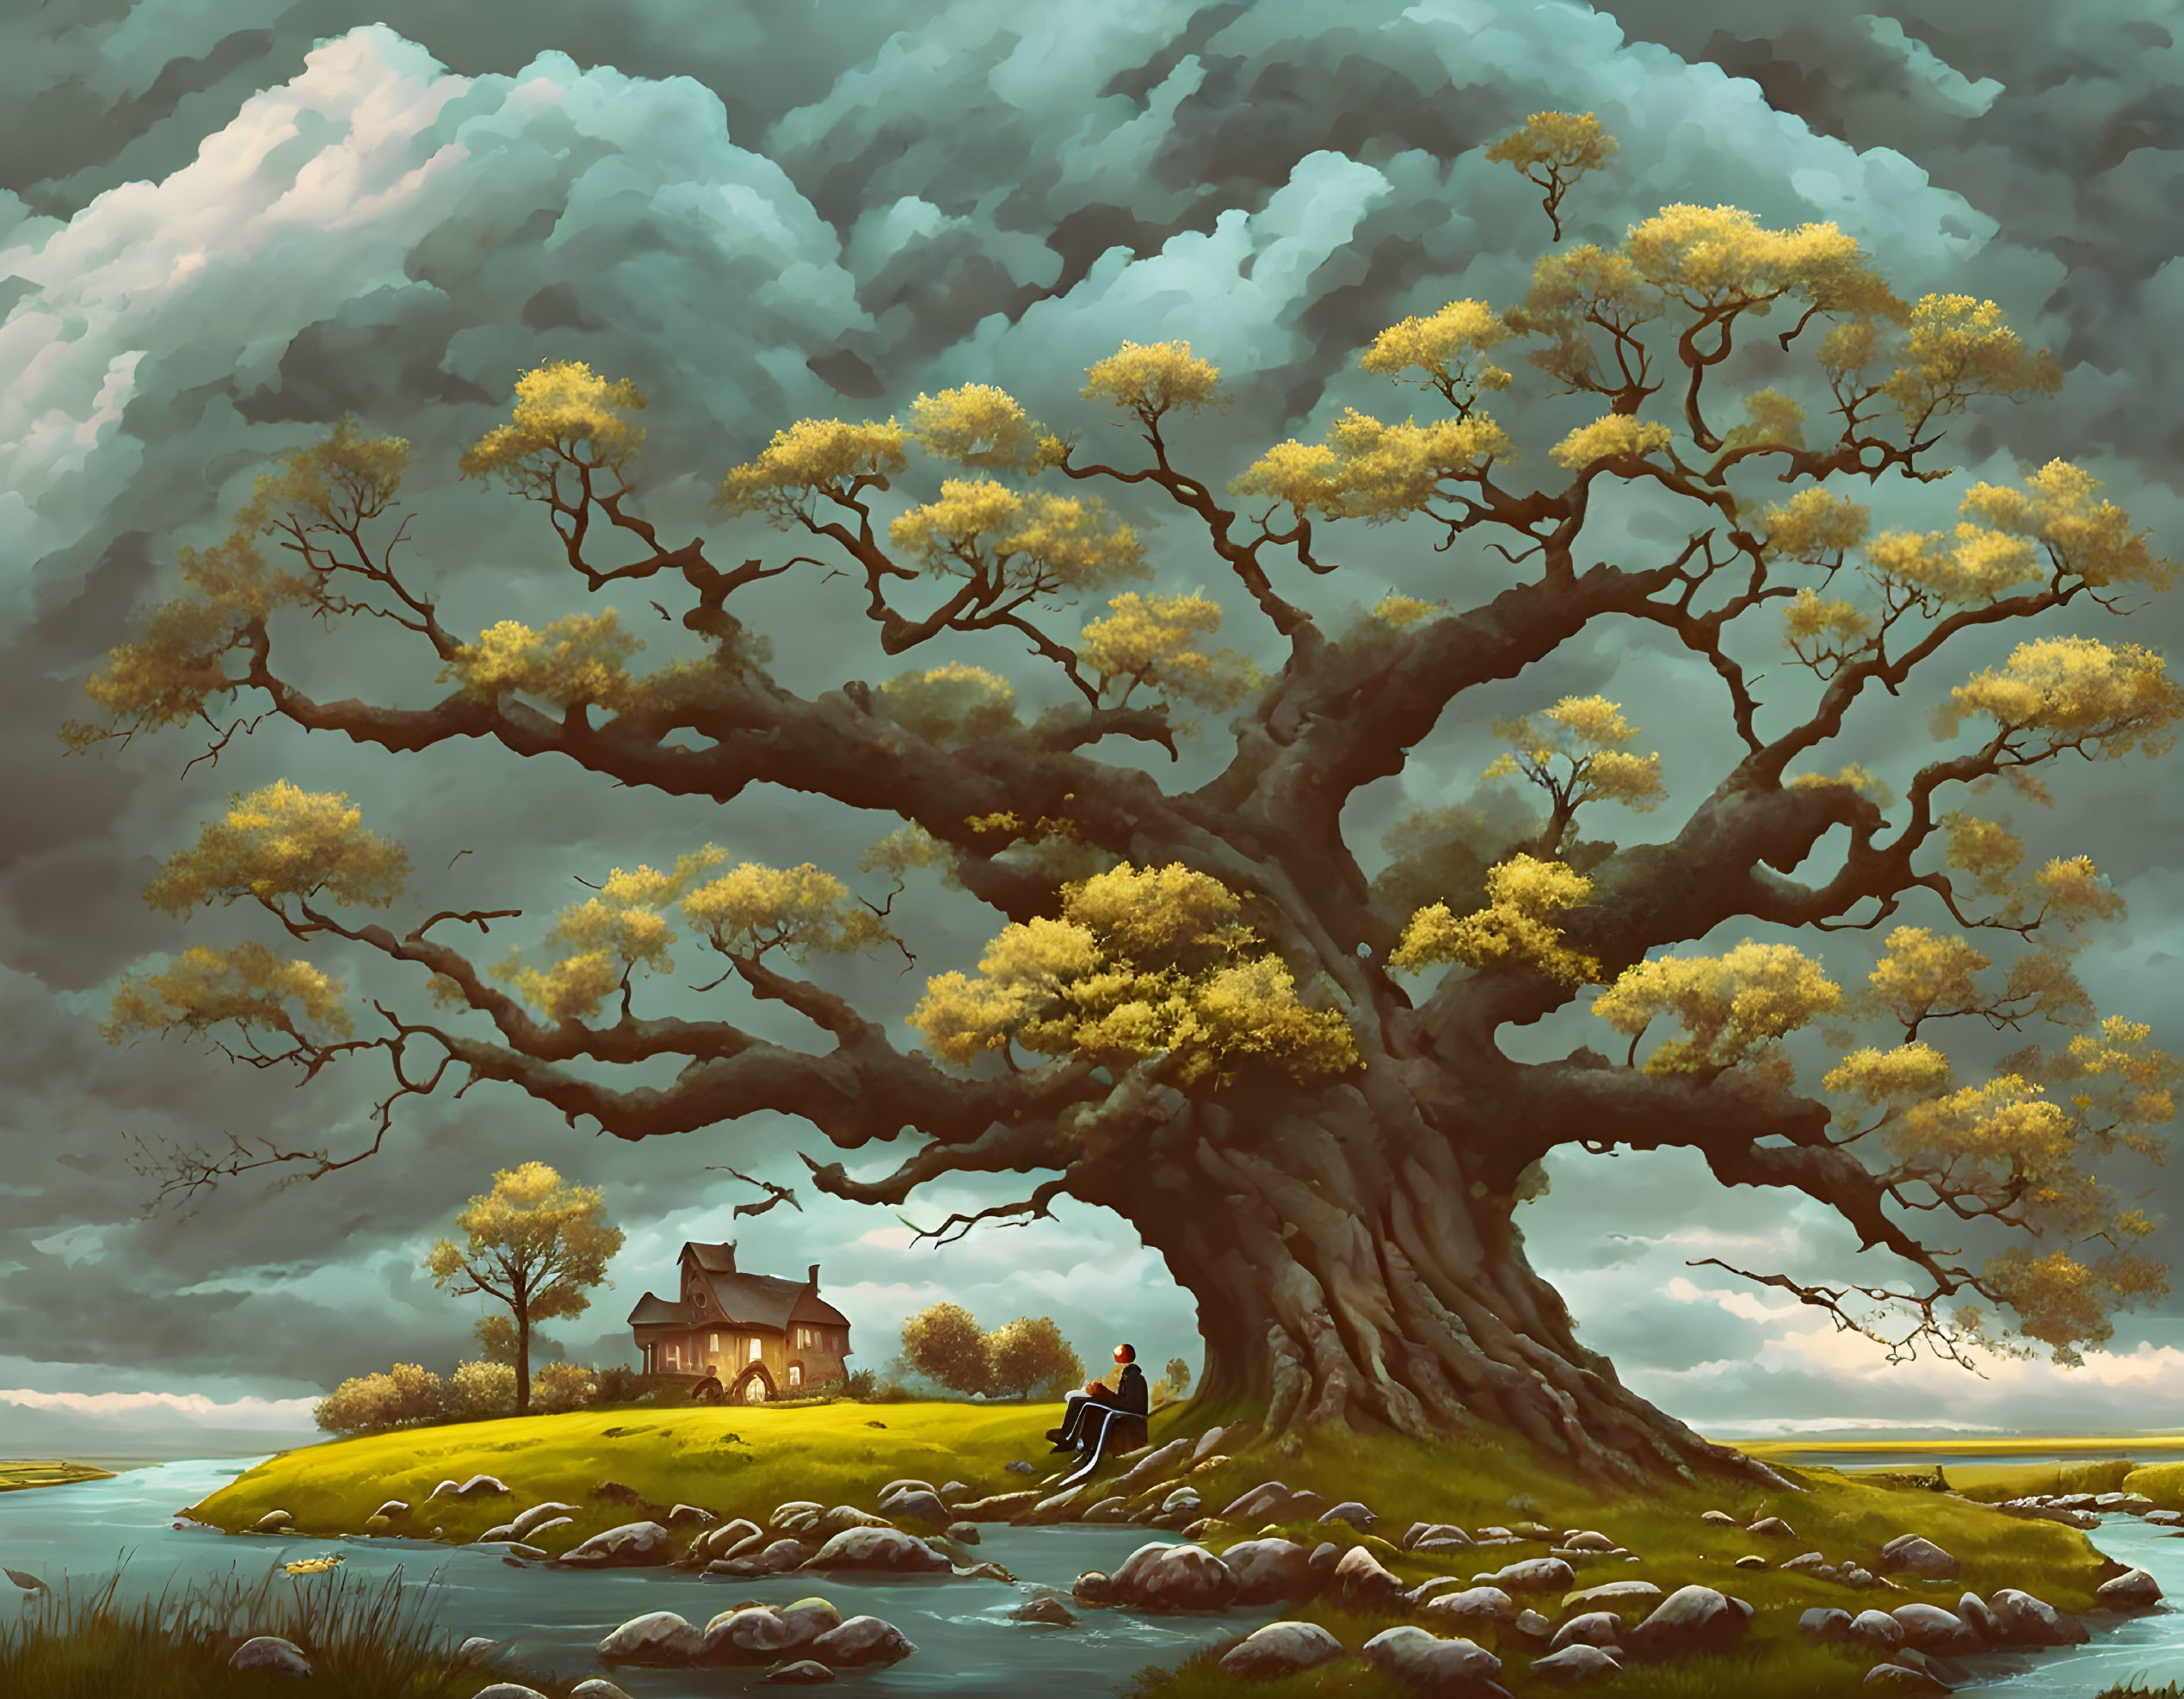 The Sheltering Oak: A Stormy Haven